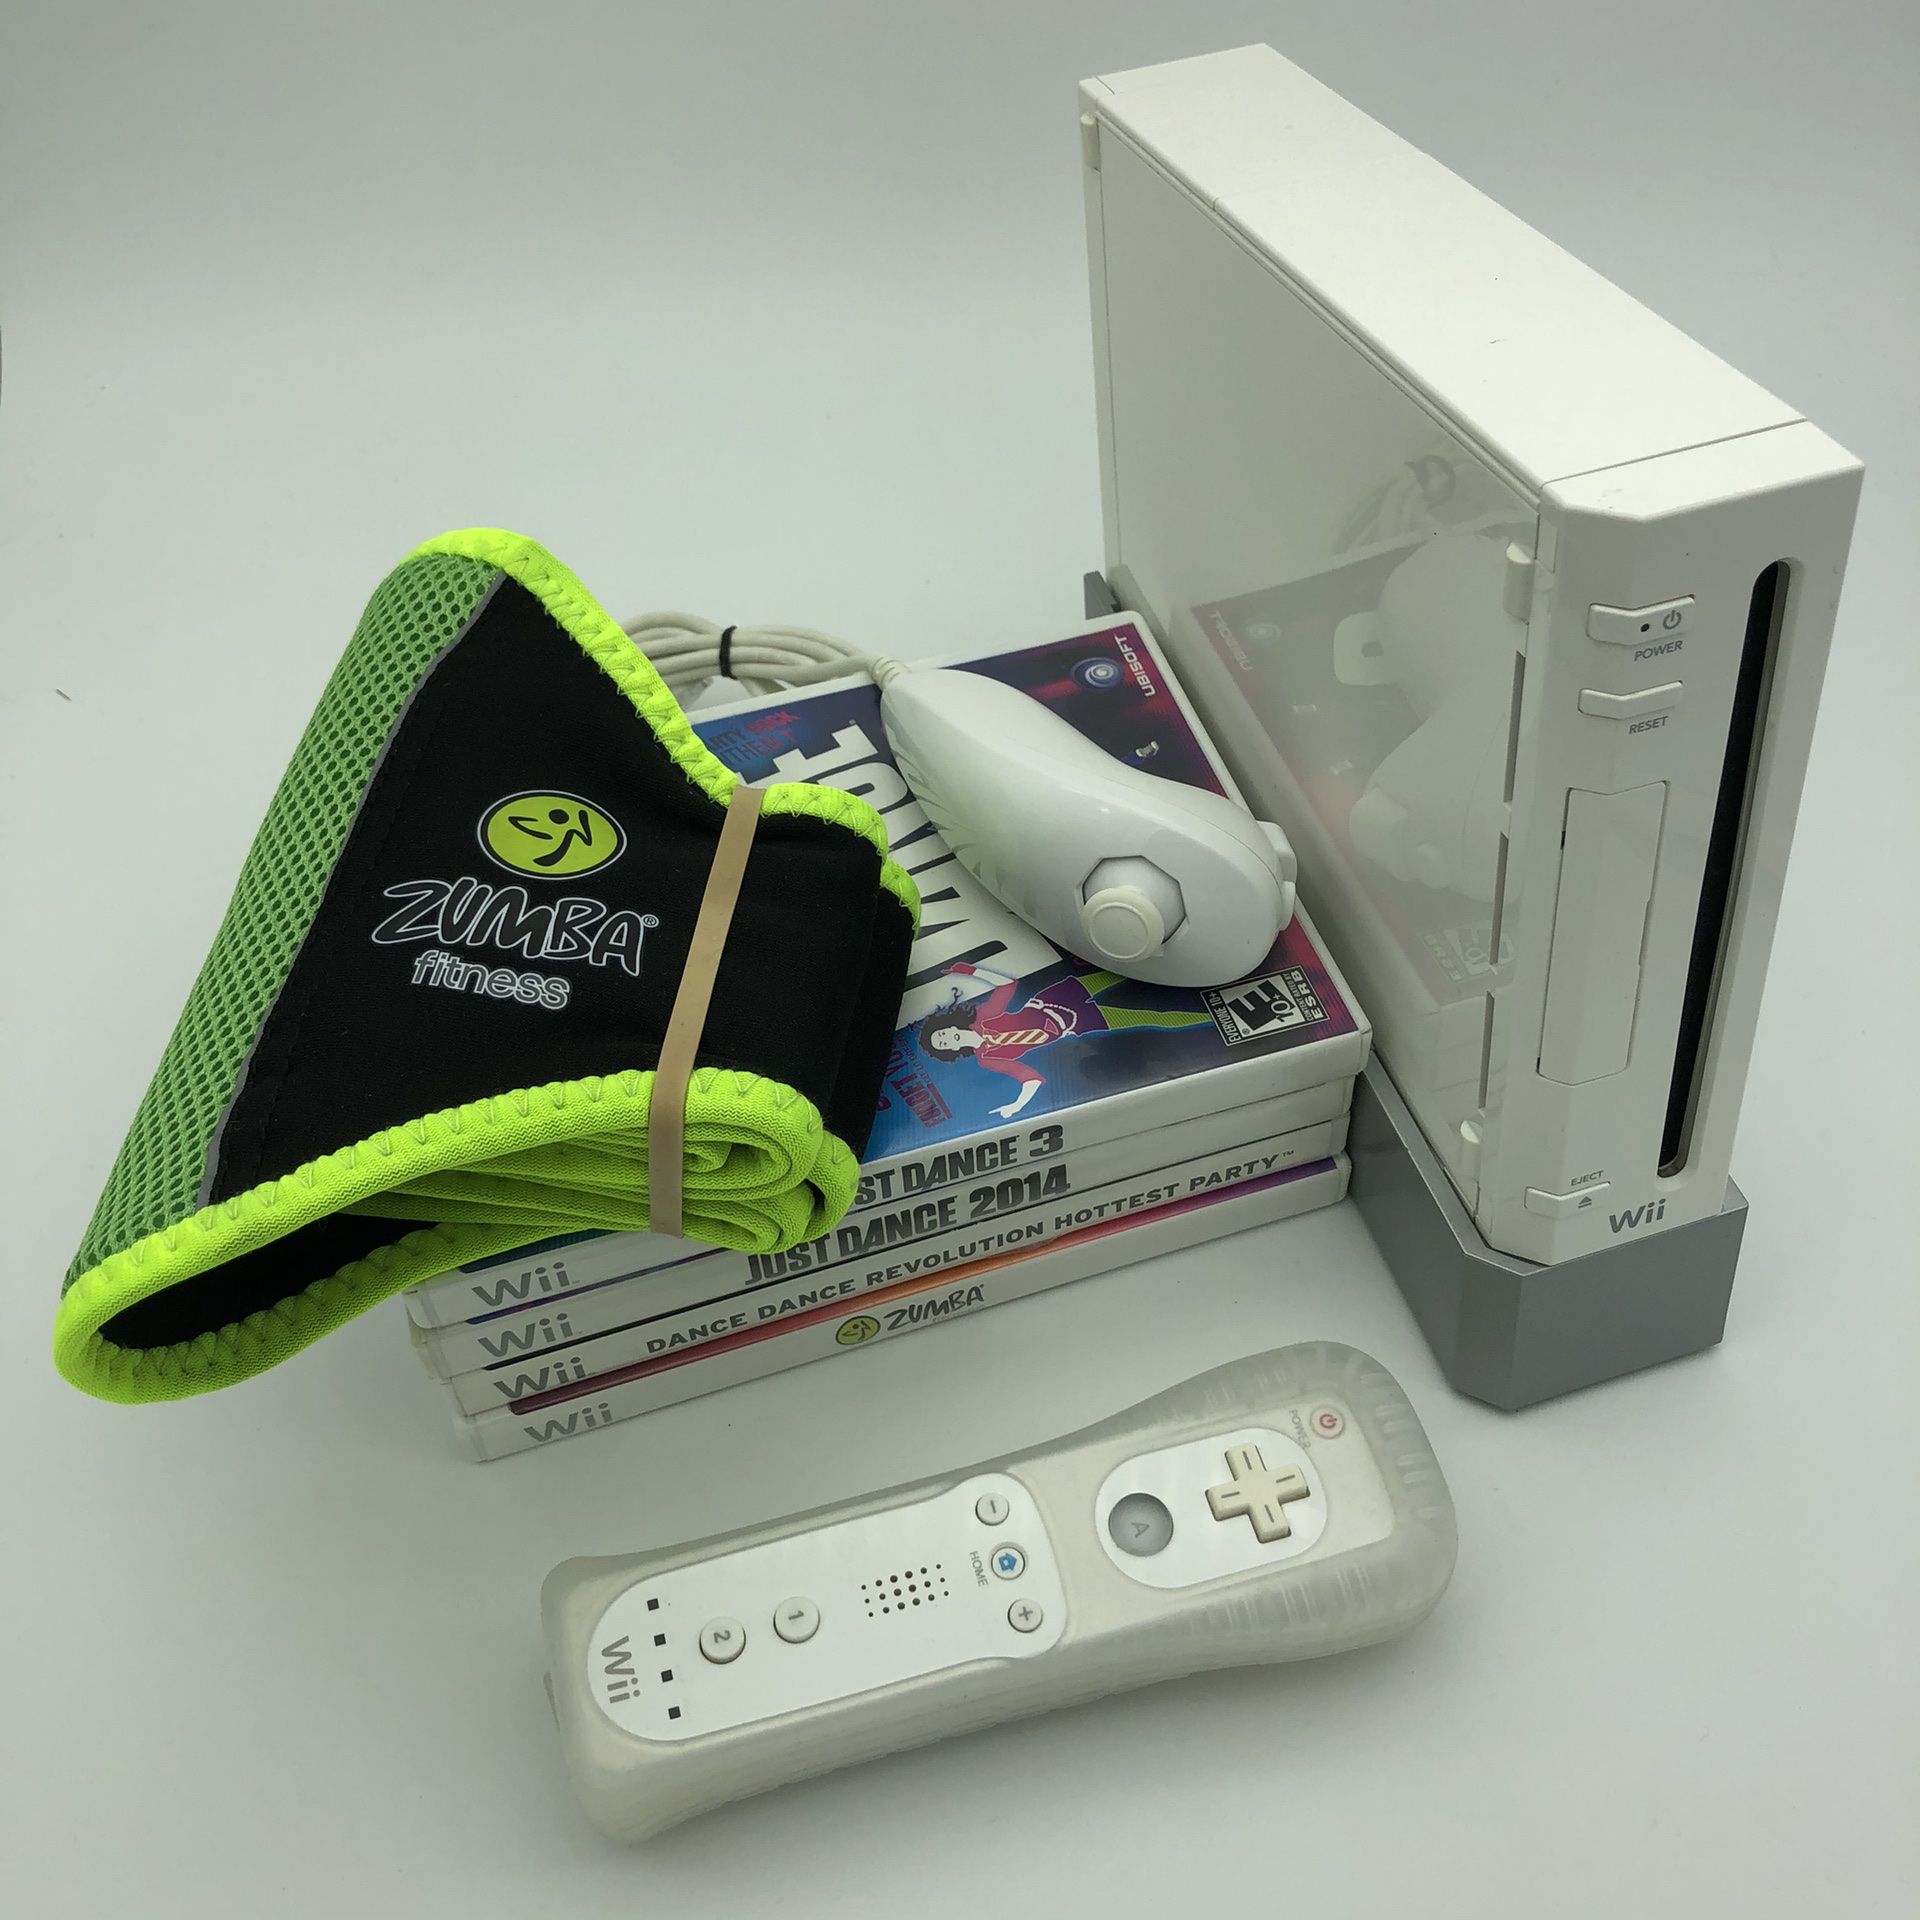 Nintendo Wii White Console w/ Fitness Dance Games